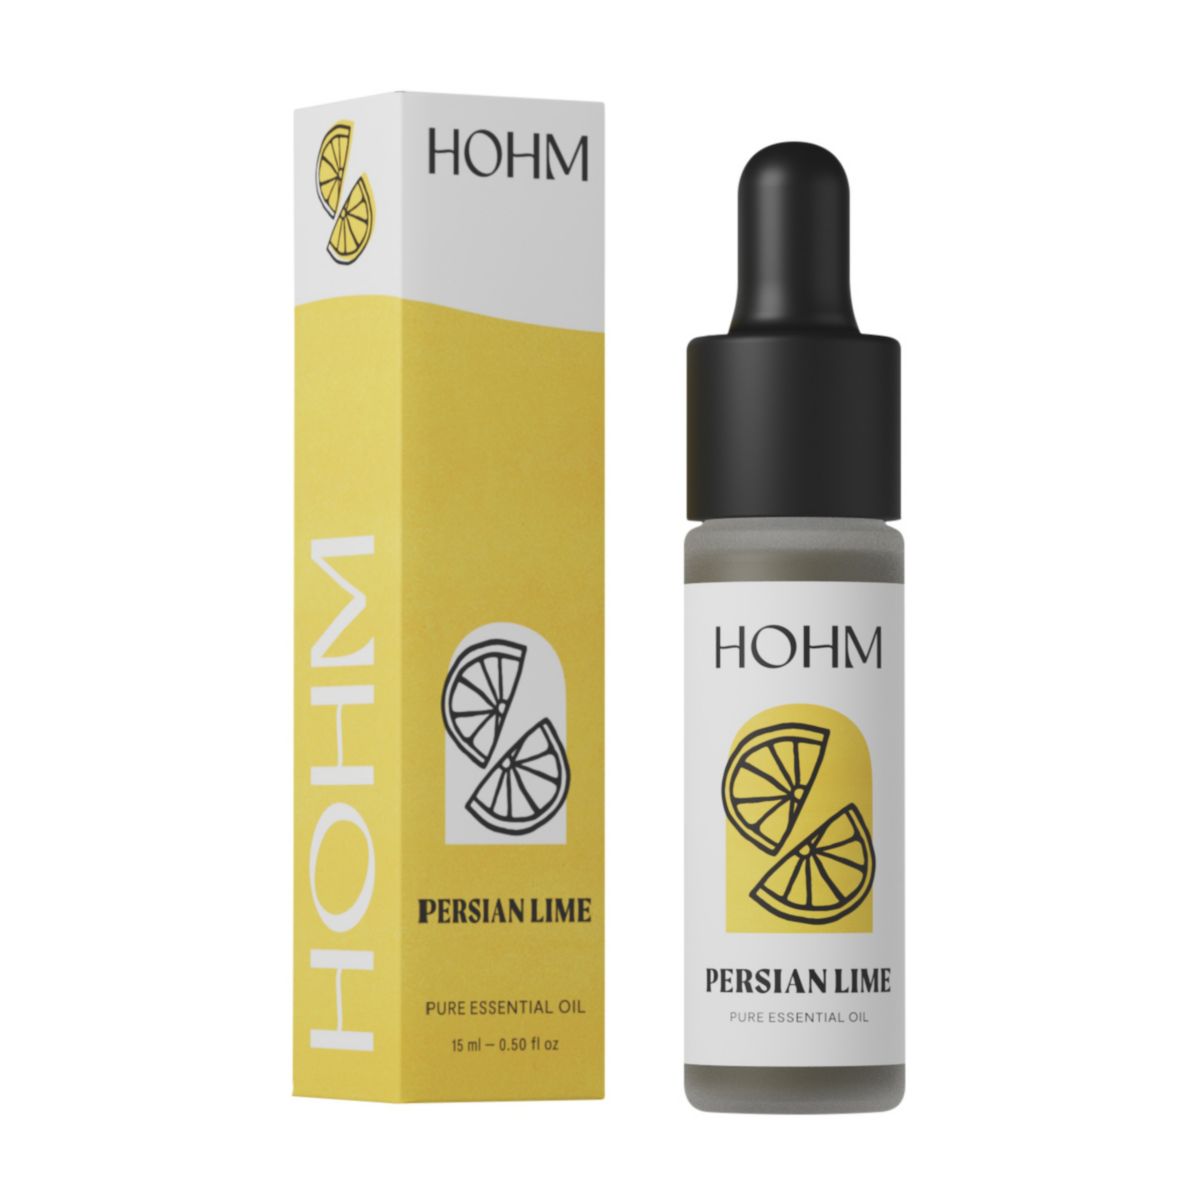 Hohm Persian Lime Essential Oil - Natural, Pure Essential Oil for Your Home Diffuser - 15 mL HOHM